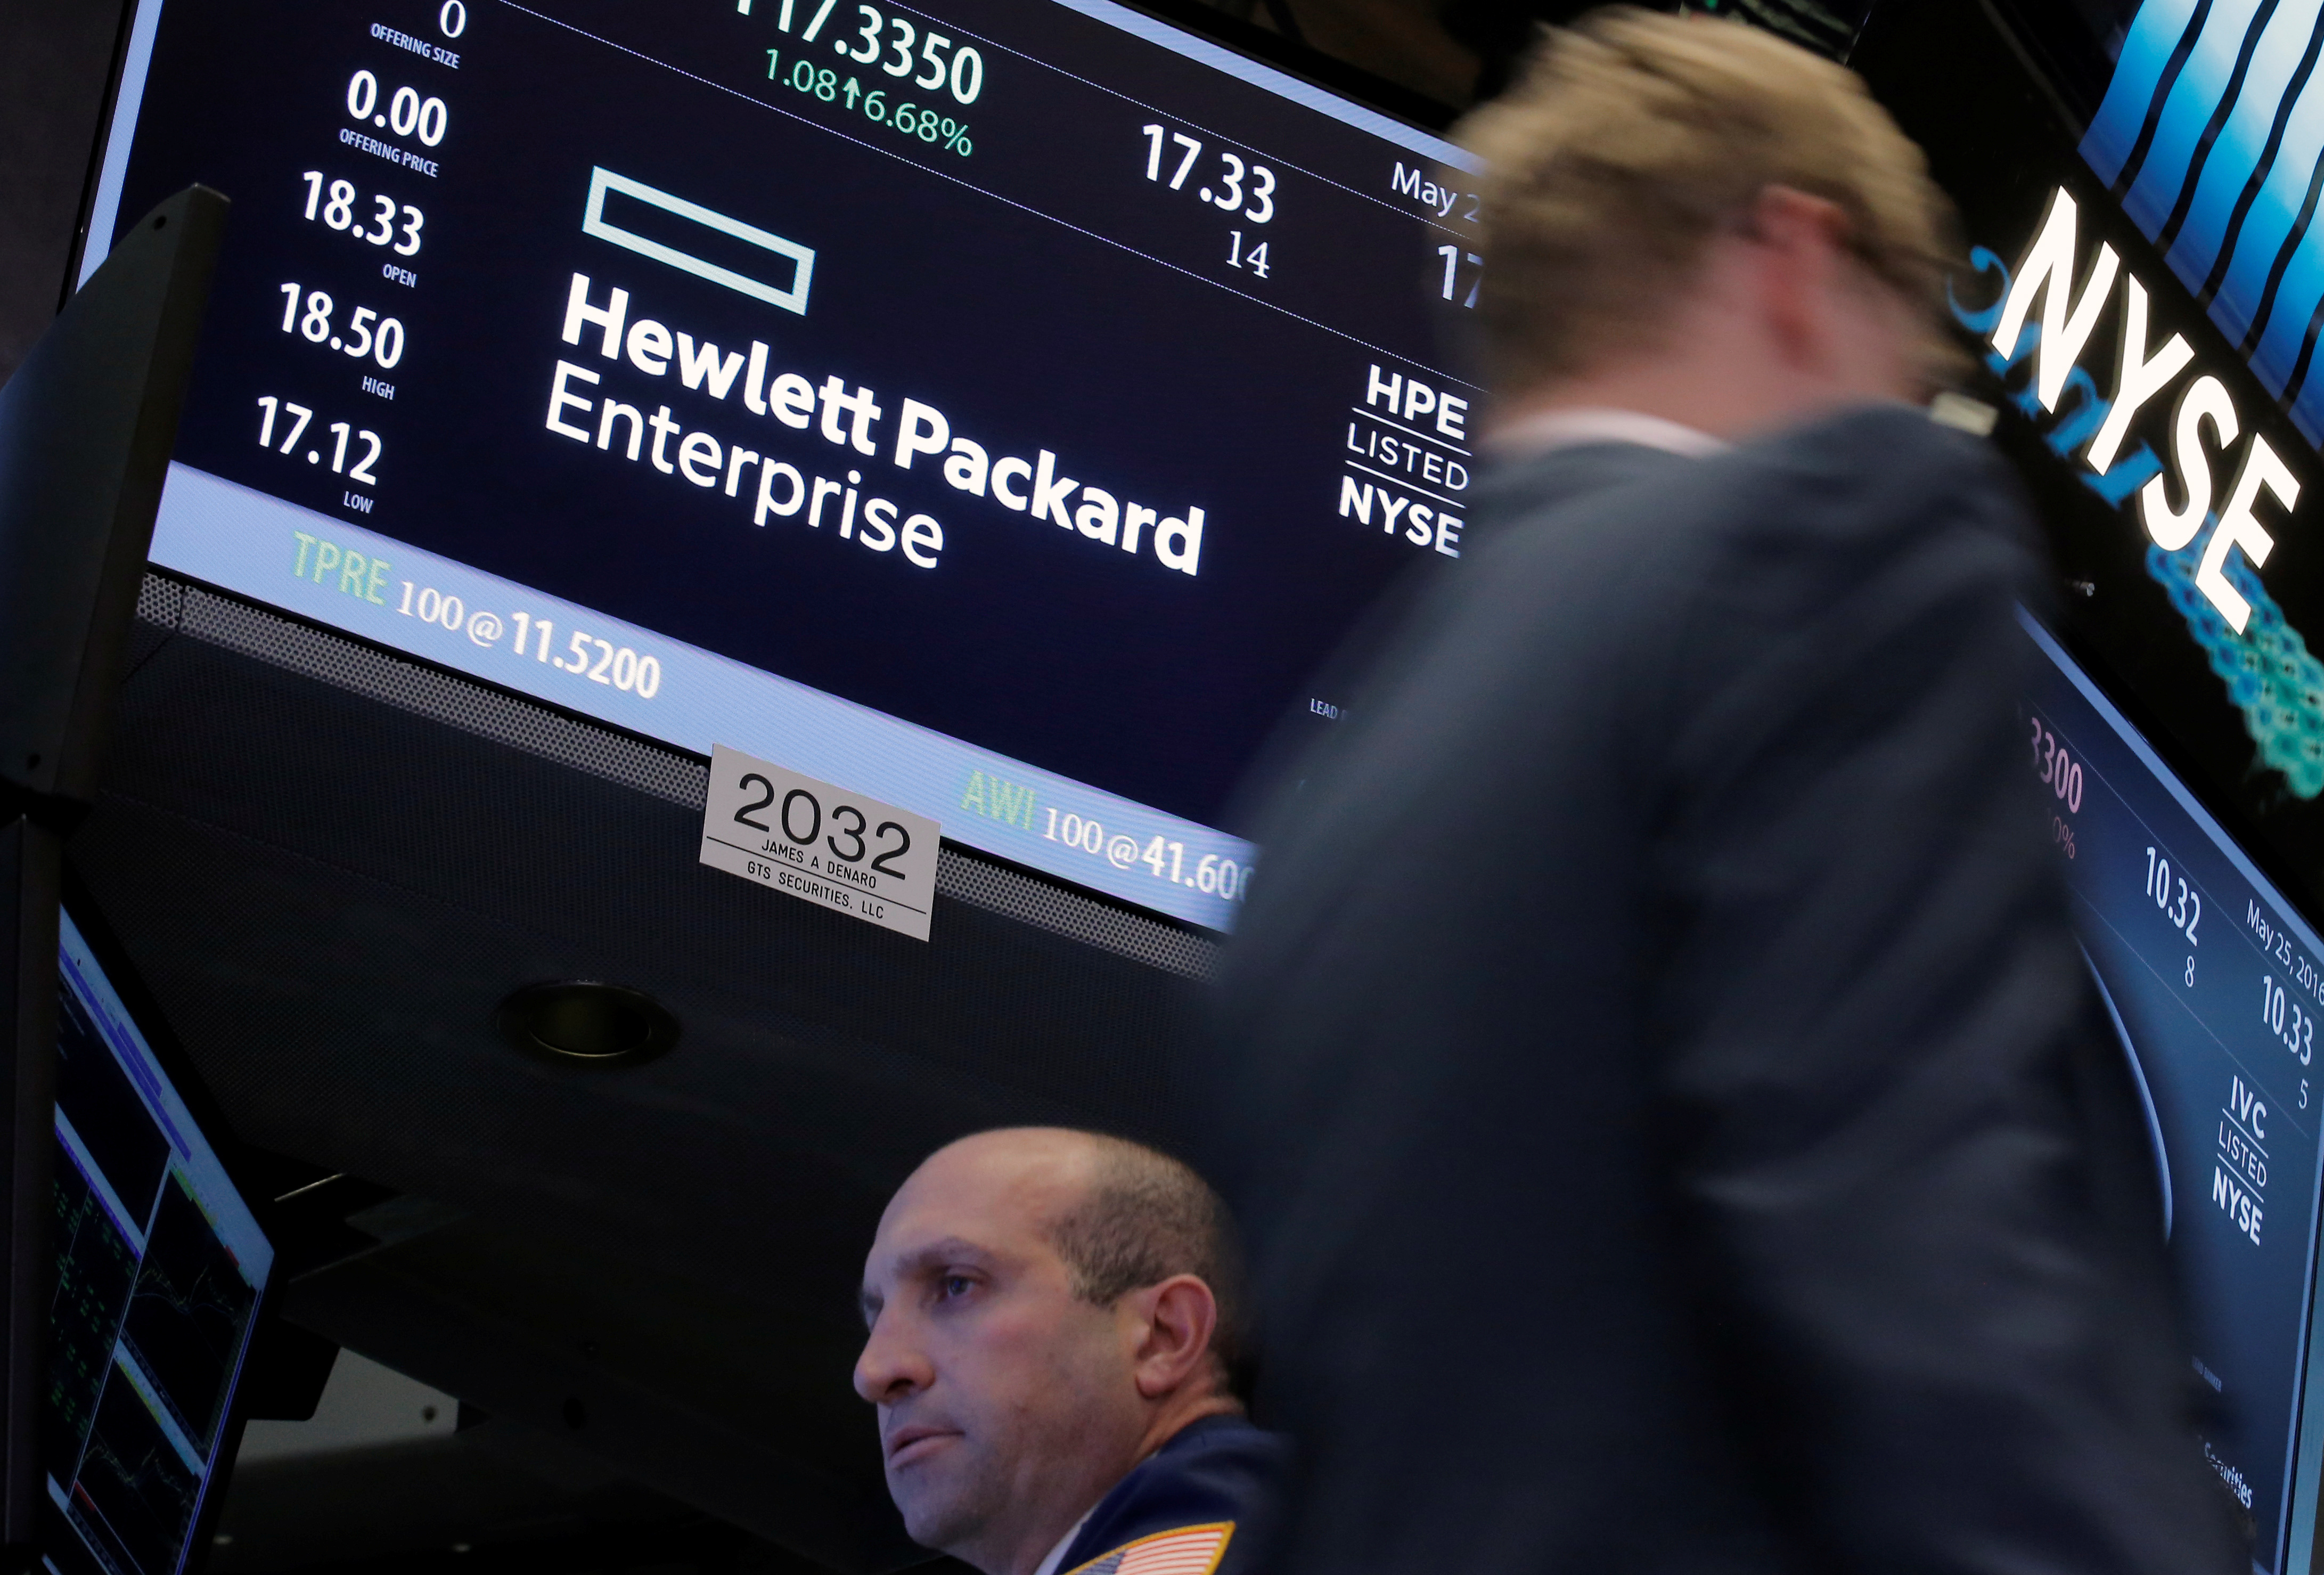 A trader passes by the post where Hewlett Packard Enterprise Co., is traded on the floor of the New York Stock Exchange